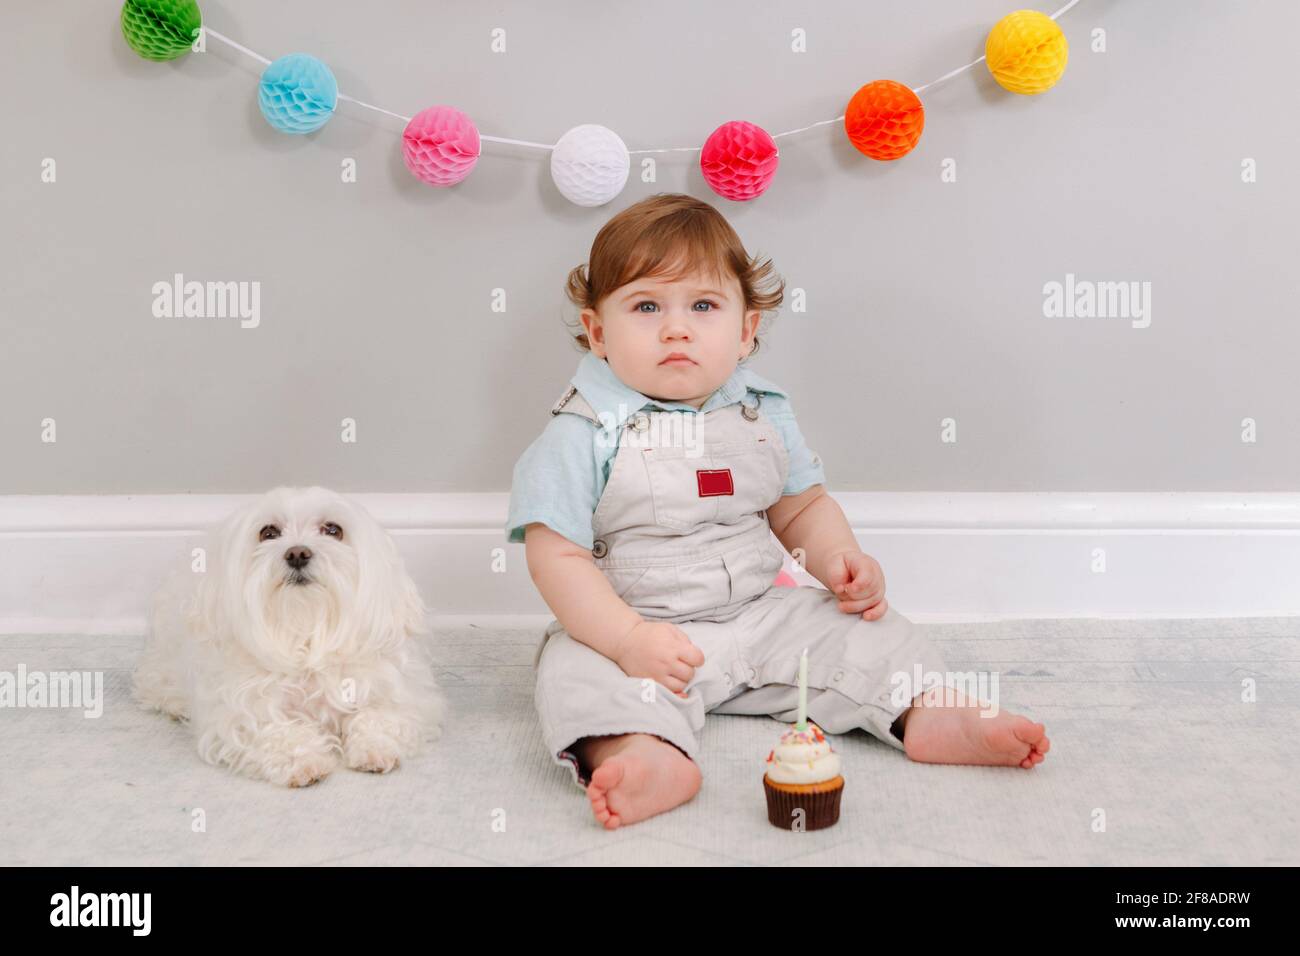 Happy cute Caucasian baby boy celebrating his first birthday at home. Child kid toddler sitting on floor with white pet dog friend. Tasty cupcake Stock Photo